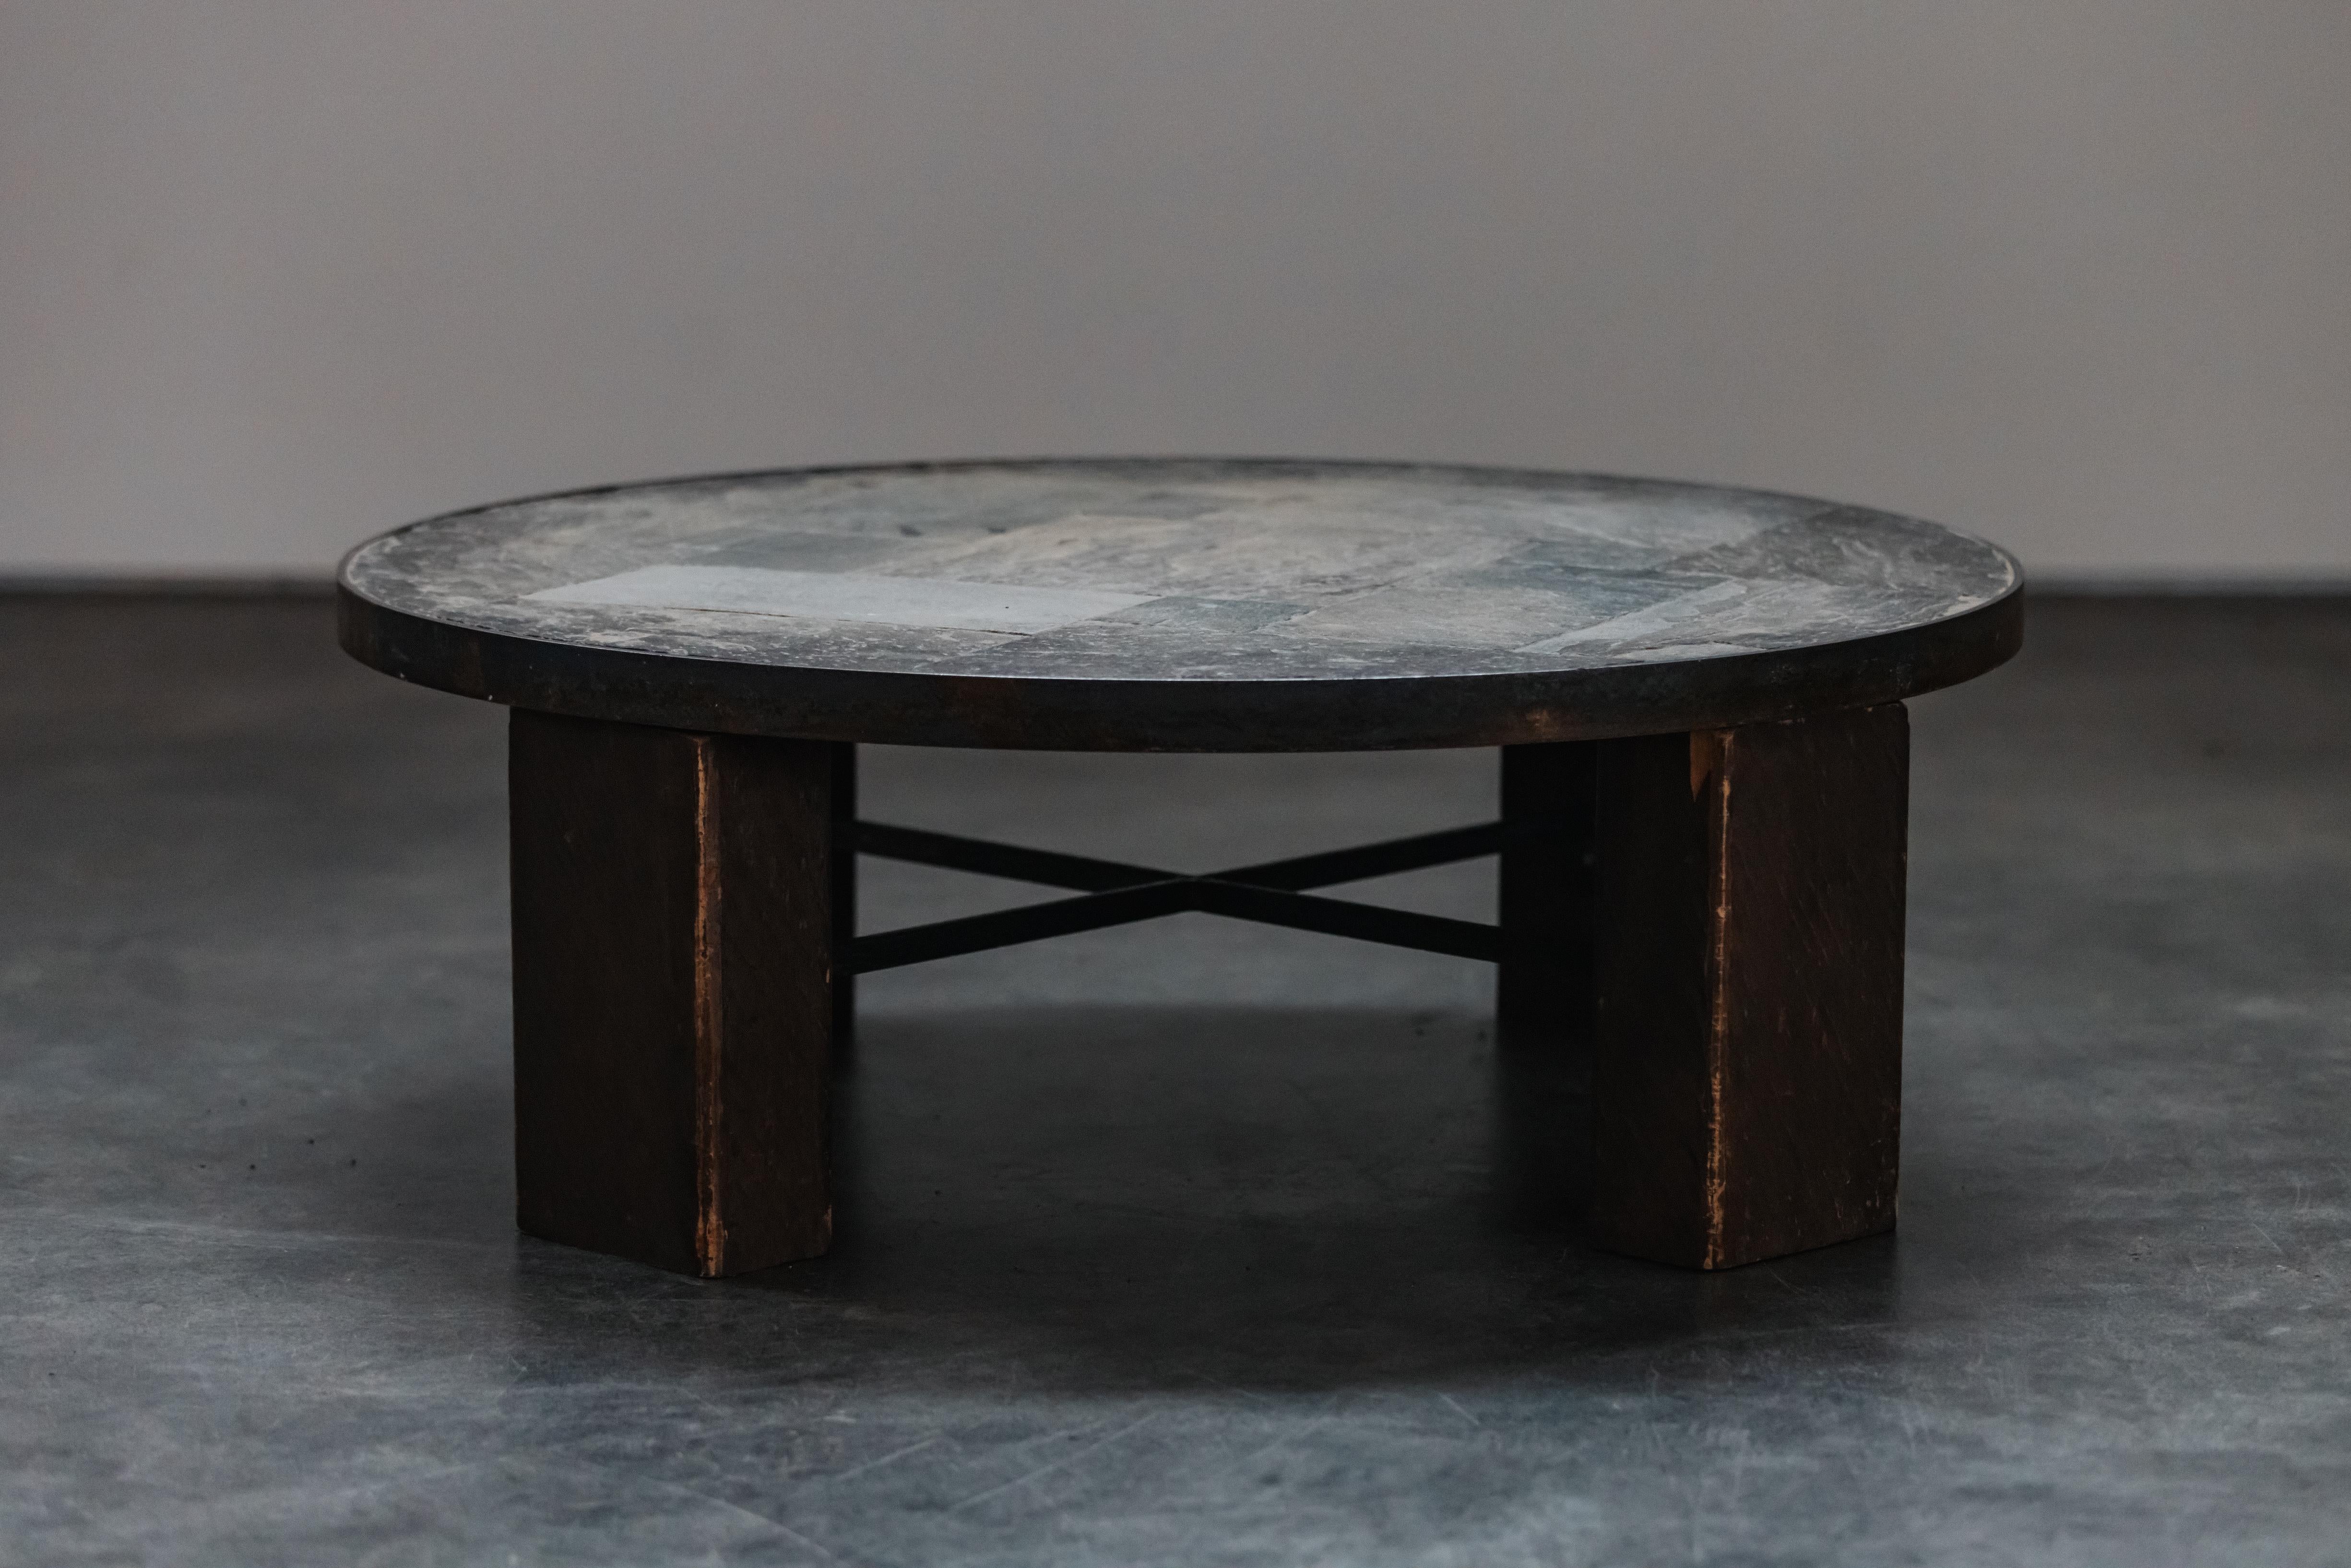 Vintage Stone And Oak Coffee Table From France, Circa 1960 For Sale 3